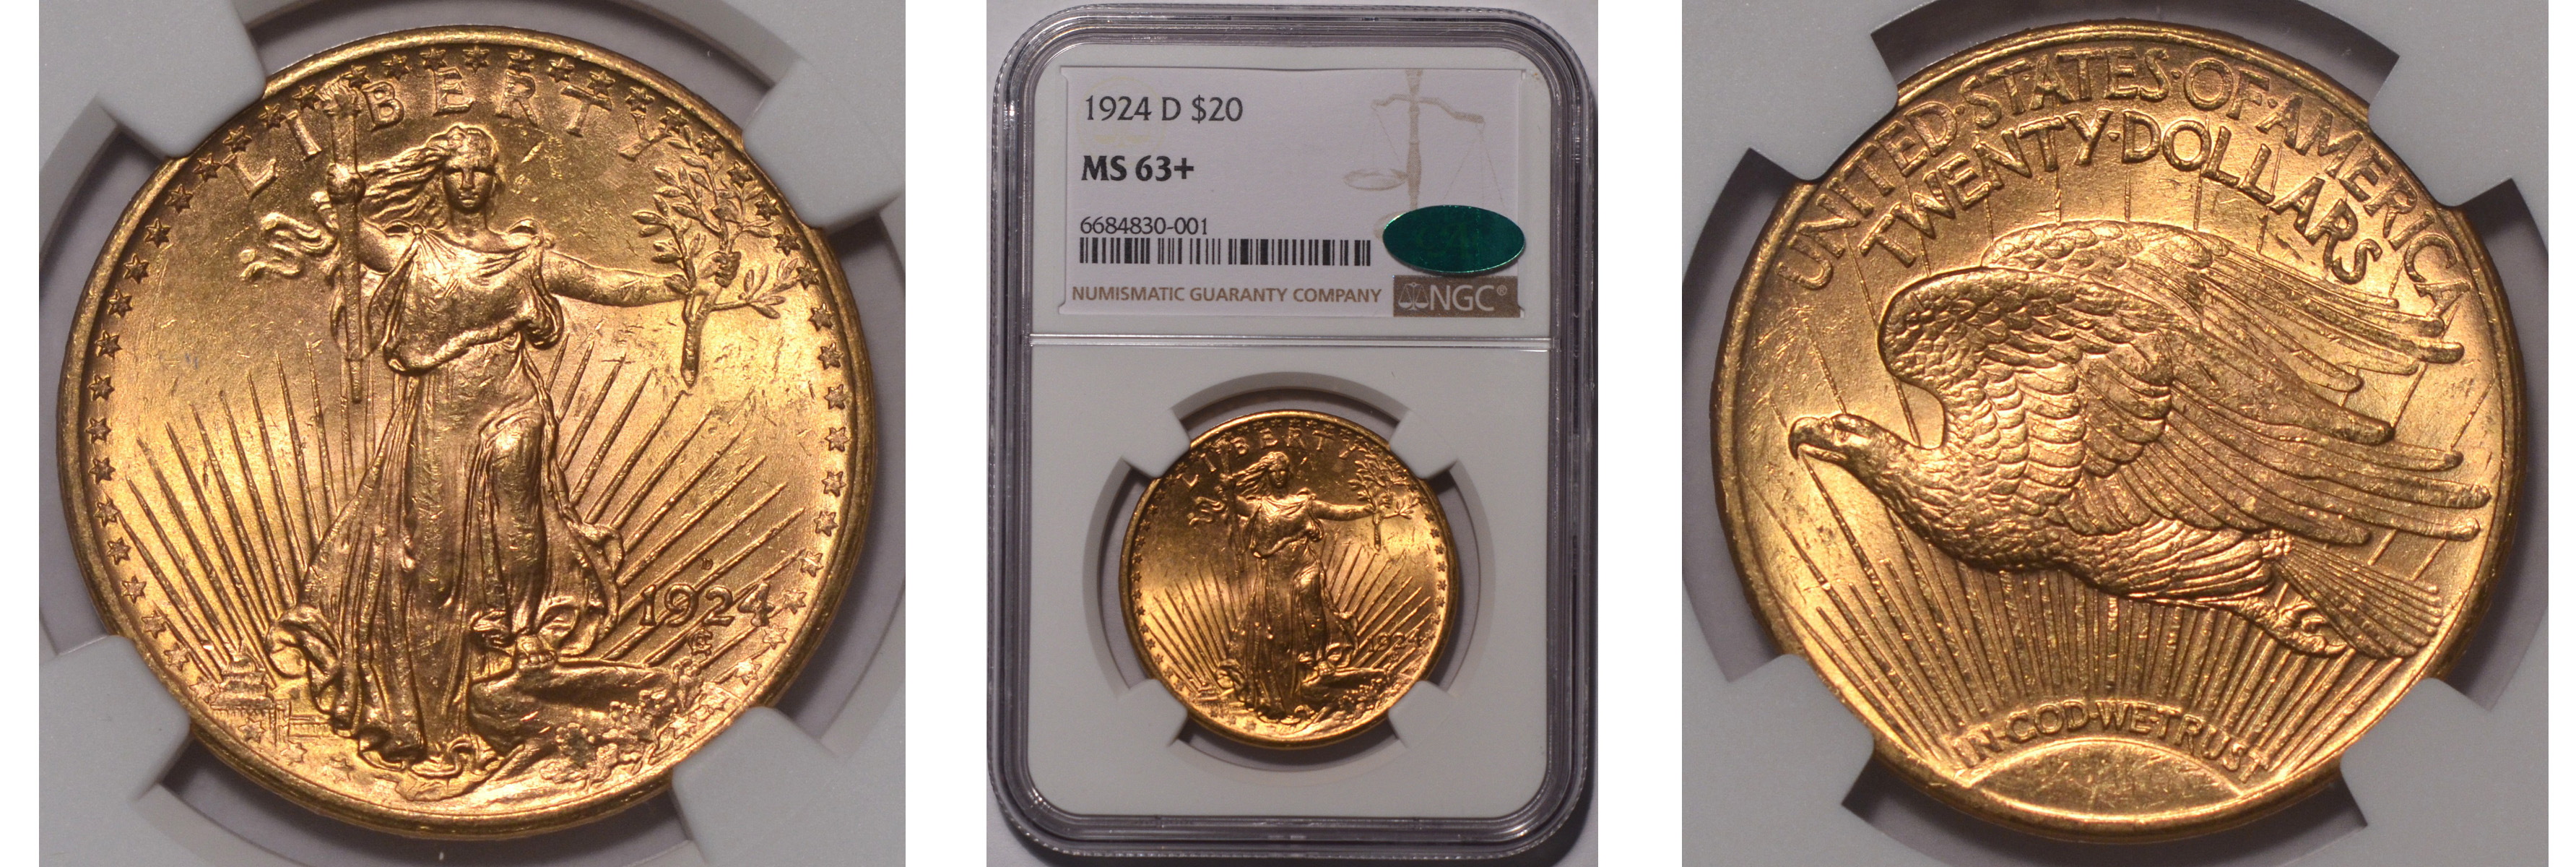 1924-D Double Eagle NGC MS63+